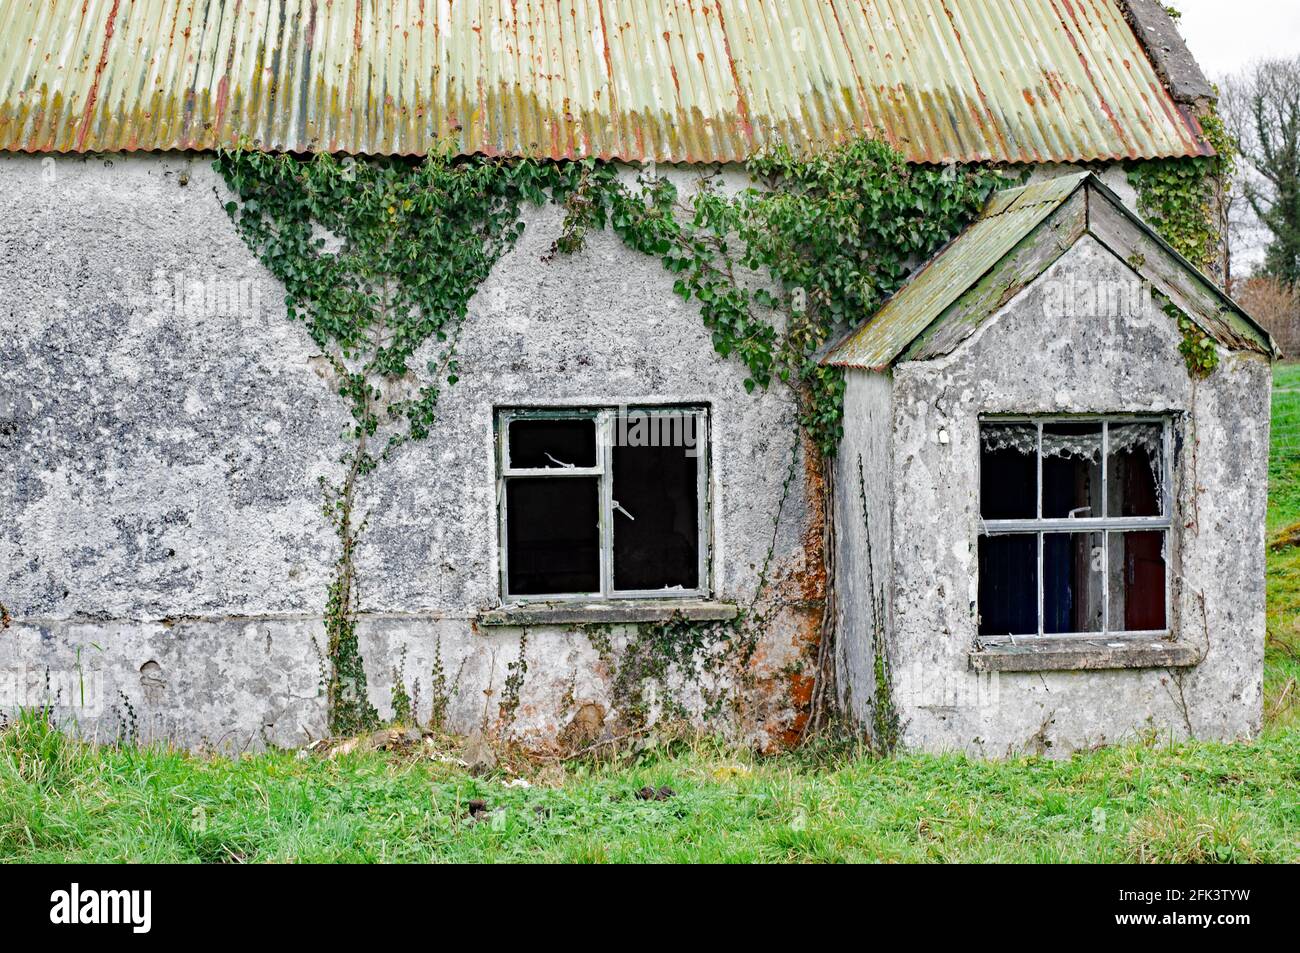 Abandoned house in the country, Co. Cavan, Ireland Stock Photo